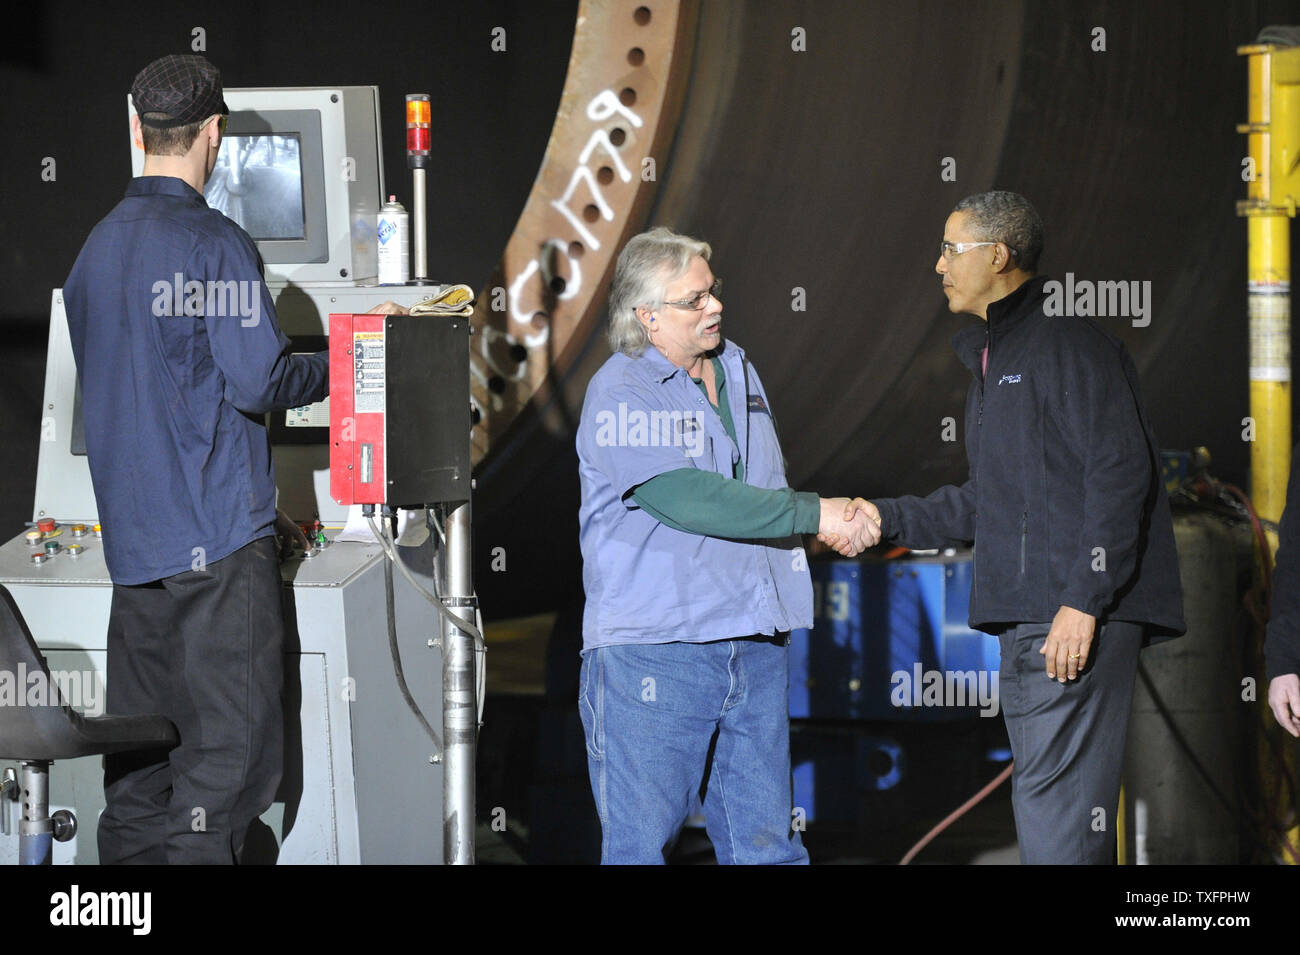 U. S. President Barack Obama (R) greets workers as he tours Tower Tech Systems, Inc., a manufacturer of utility-scale wind towers and monopiles for on- and off-shore wind development, in Manitowoc, Wisconsin on January 26, 2011. President Obama, Vice President Joe Biden and other members of the President's Cabinet traveled across the country Wednesday to highlight the administration's efforts to rebuild the American economy.      UPI/Brian Kersey Stock Photo